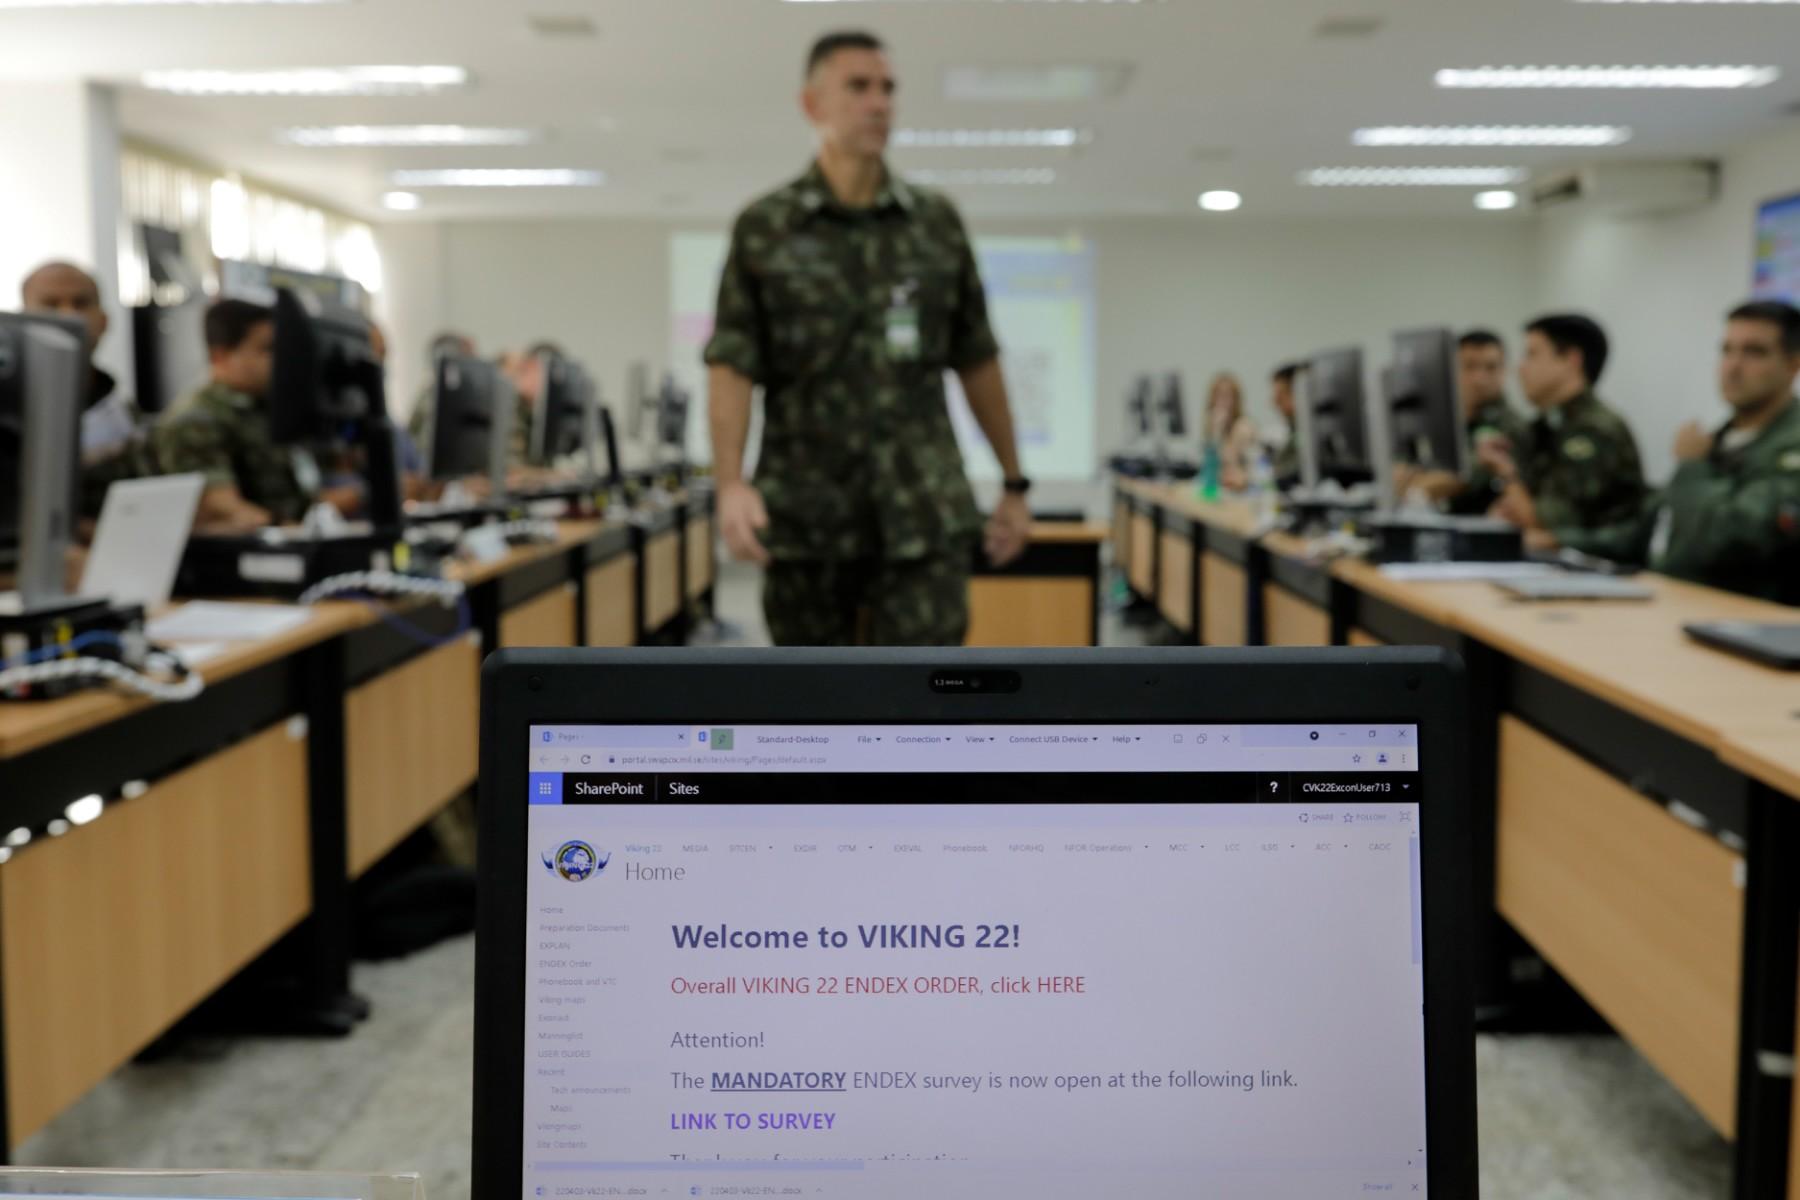 Brazilian military personnel take part in the Viking 22 exercises at the Planalto Military Command in Brasília, on April 5. Photo: AFP